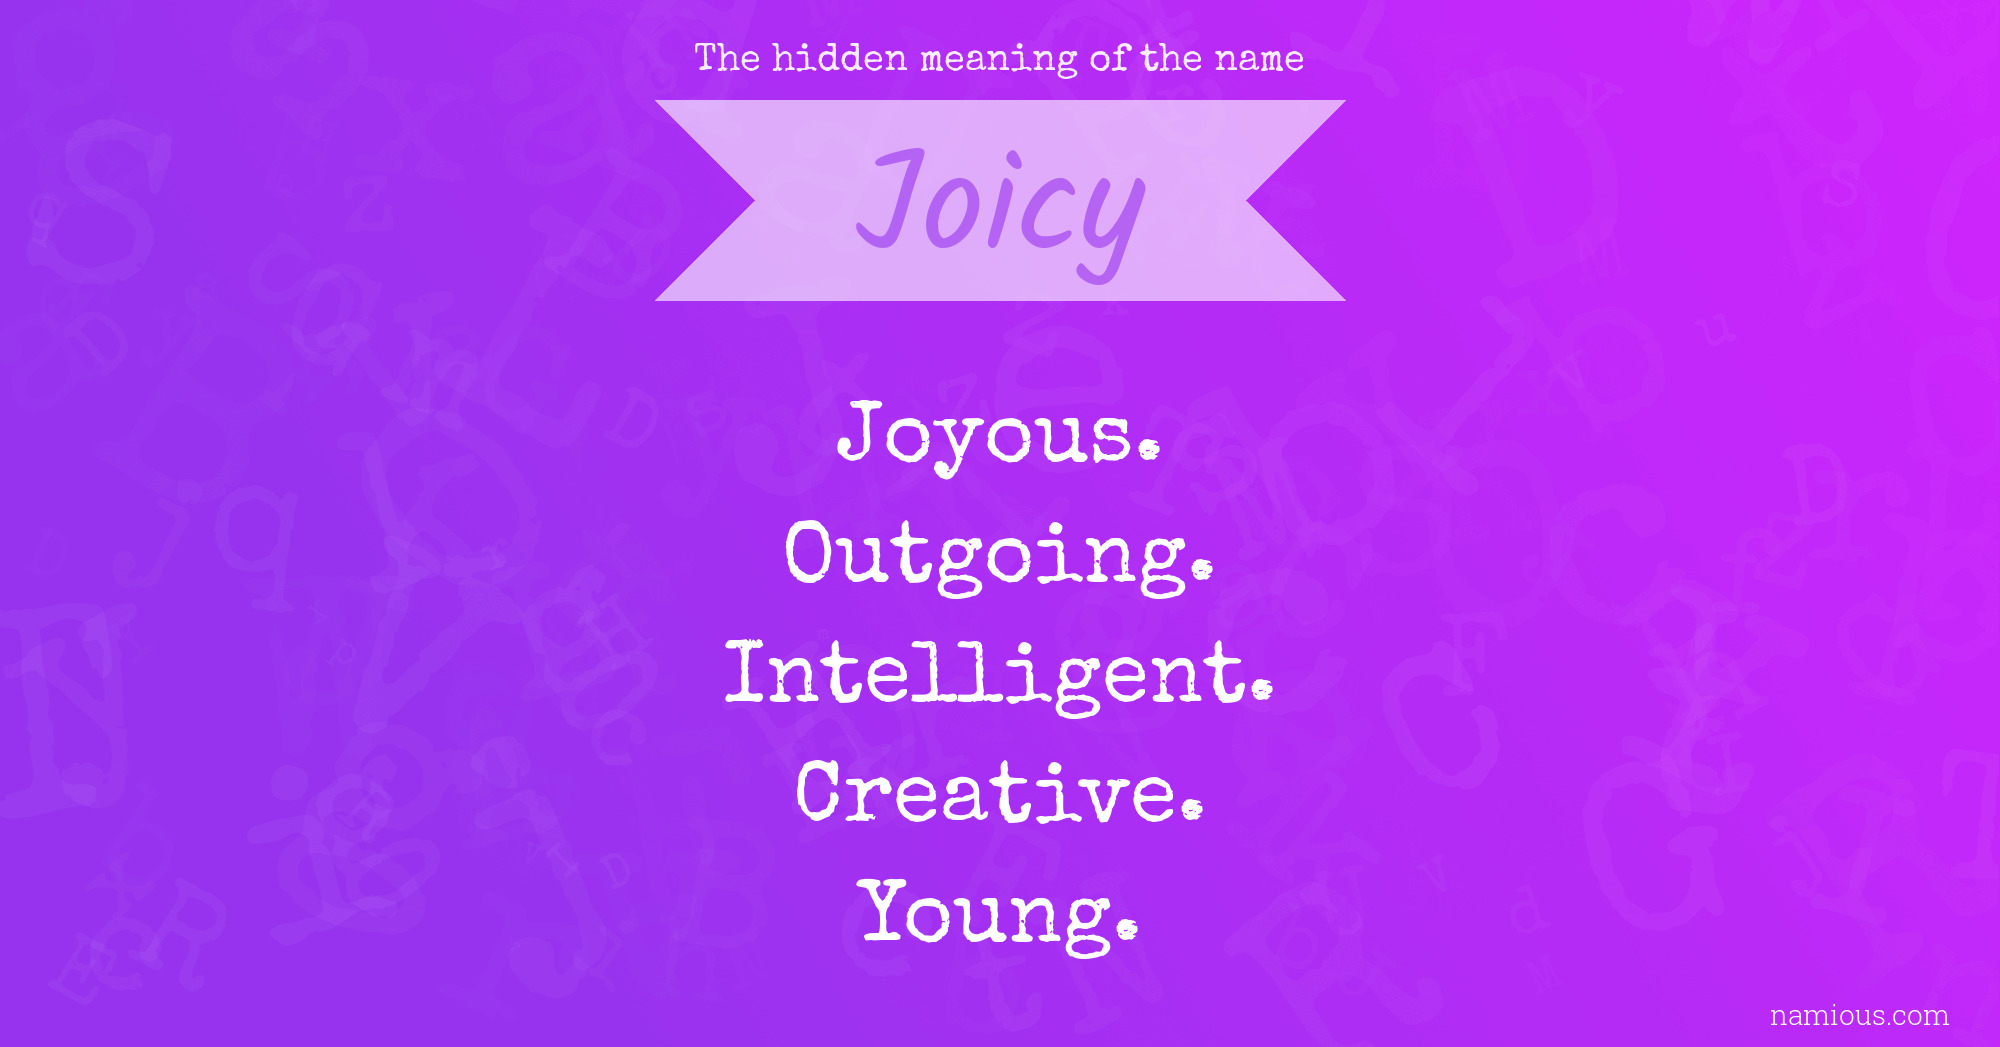 The hidden meaning of the name Joicy